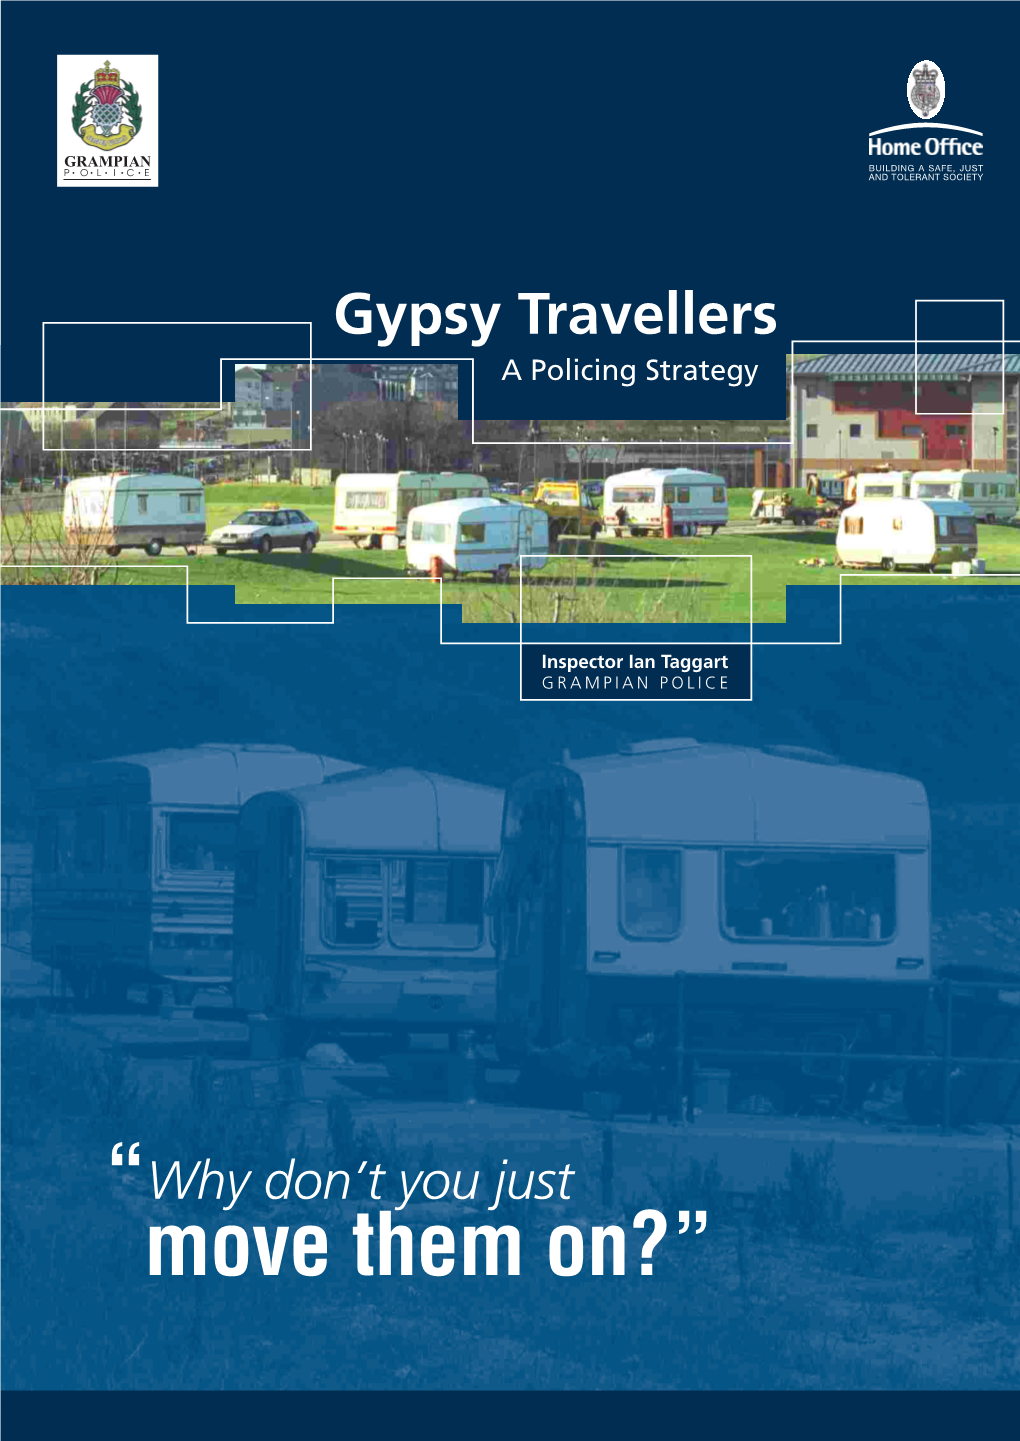 Gypsy Travellers a Policing Strategy